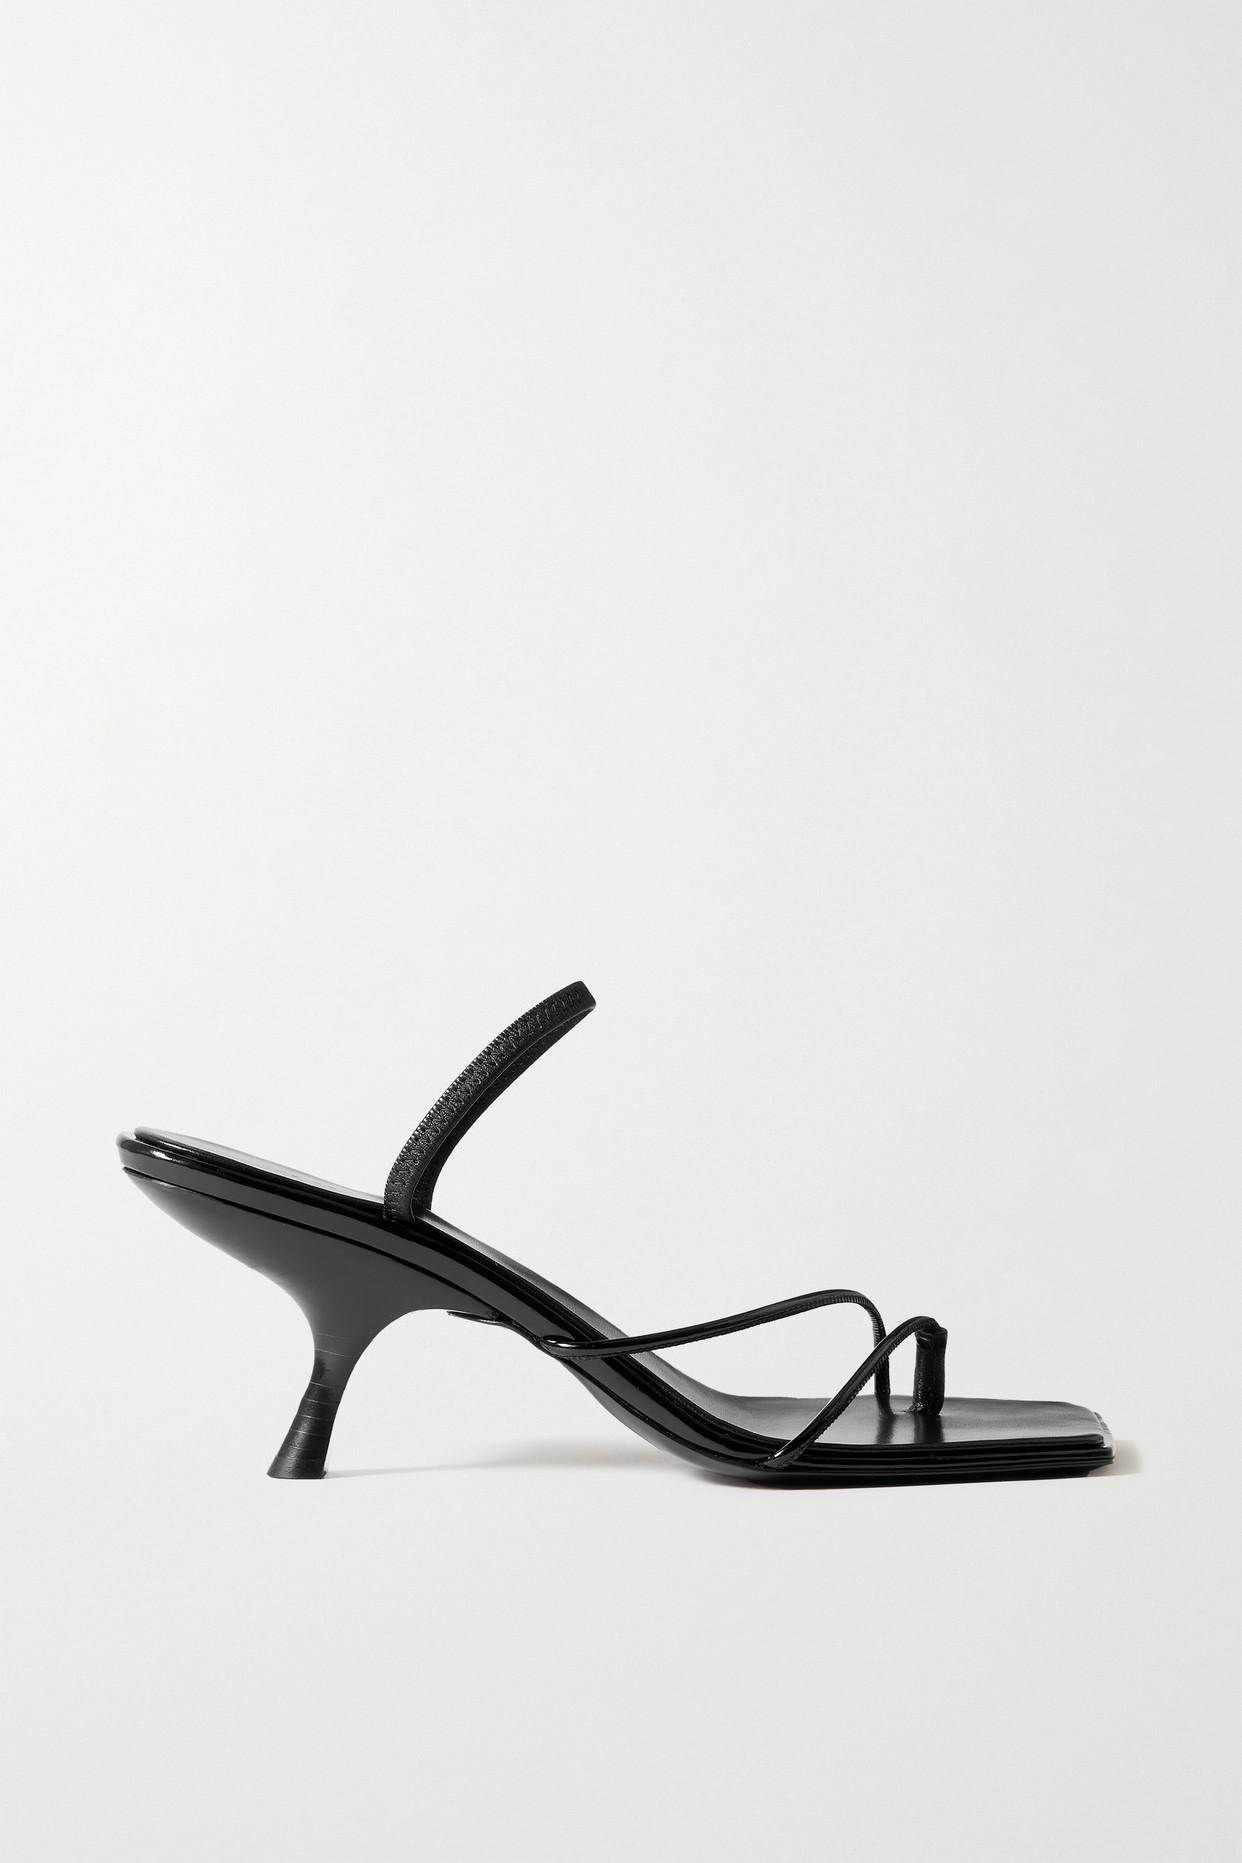 The Row Rai Leather Sandals in Black | Lyst